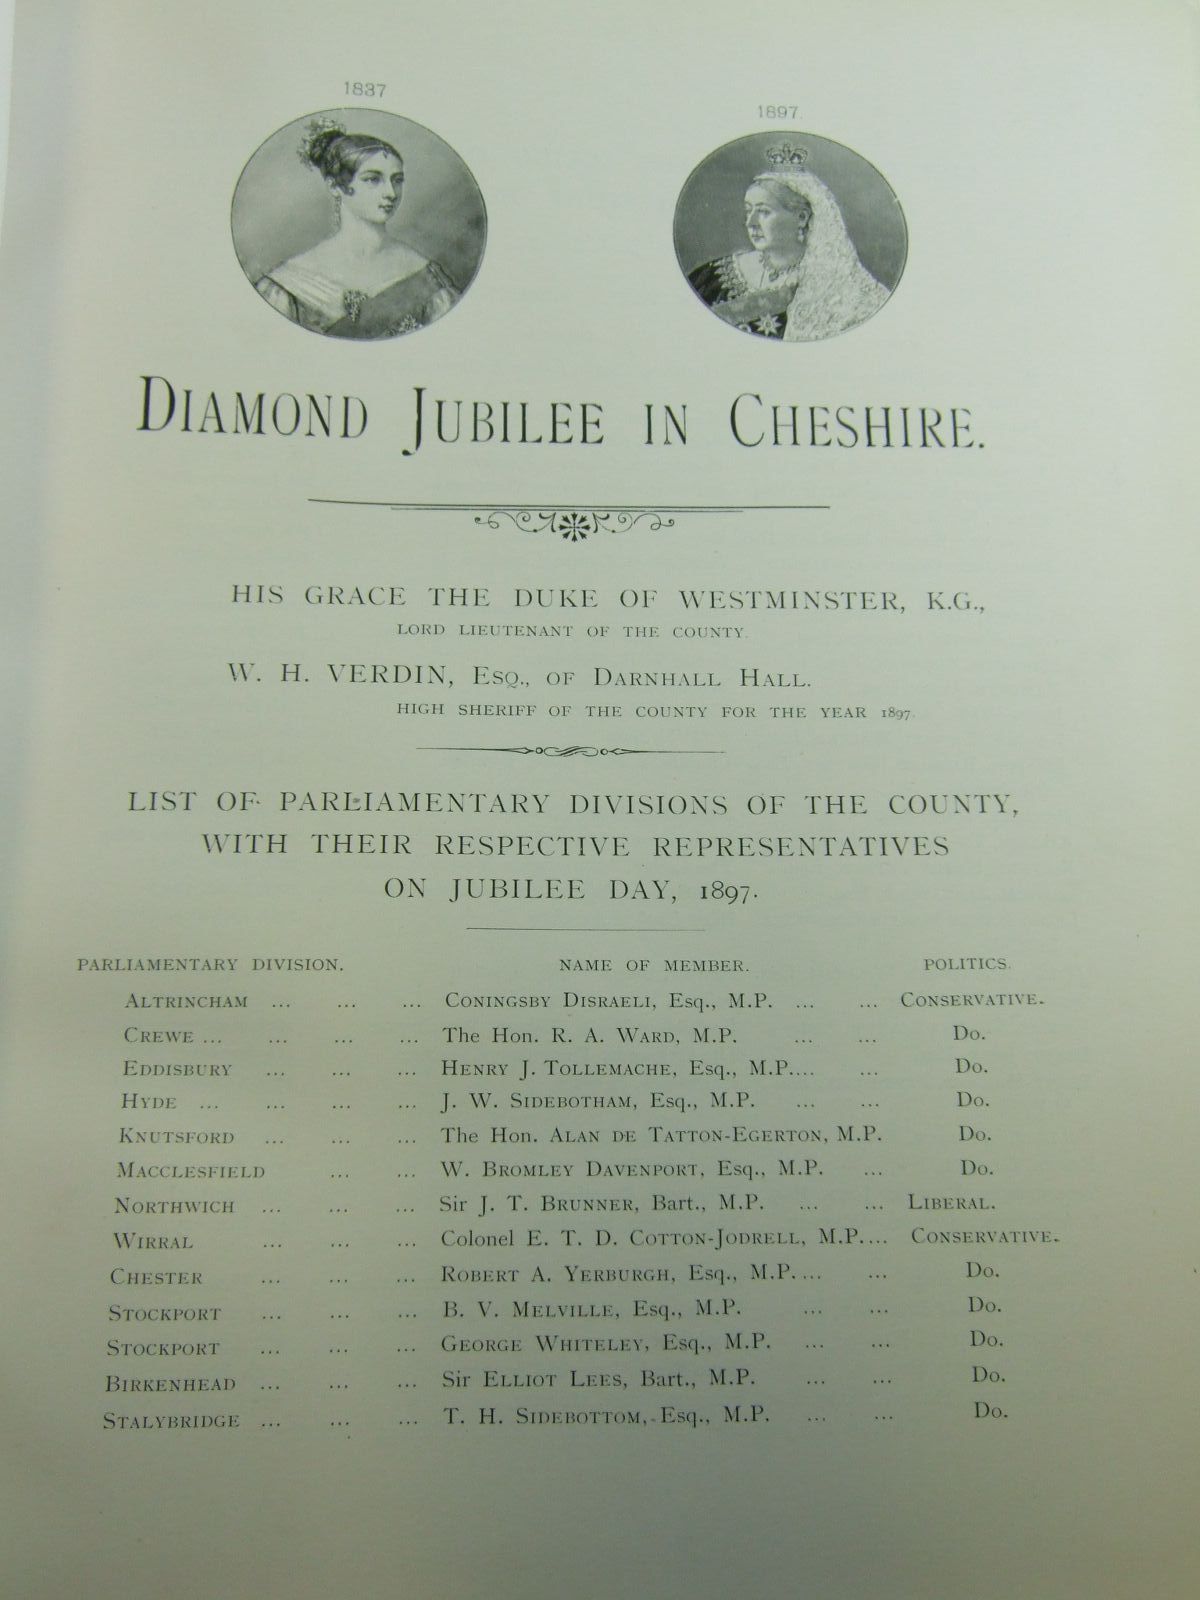 Photo of THE DIAMOND JUBILEE IN CHESHIRE written by Cooke, John H. published by Mackie & Co. Limited (STOCK CODE: 2106651)  for sale by Stella & Rose's Books